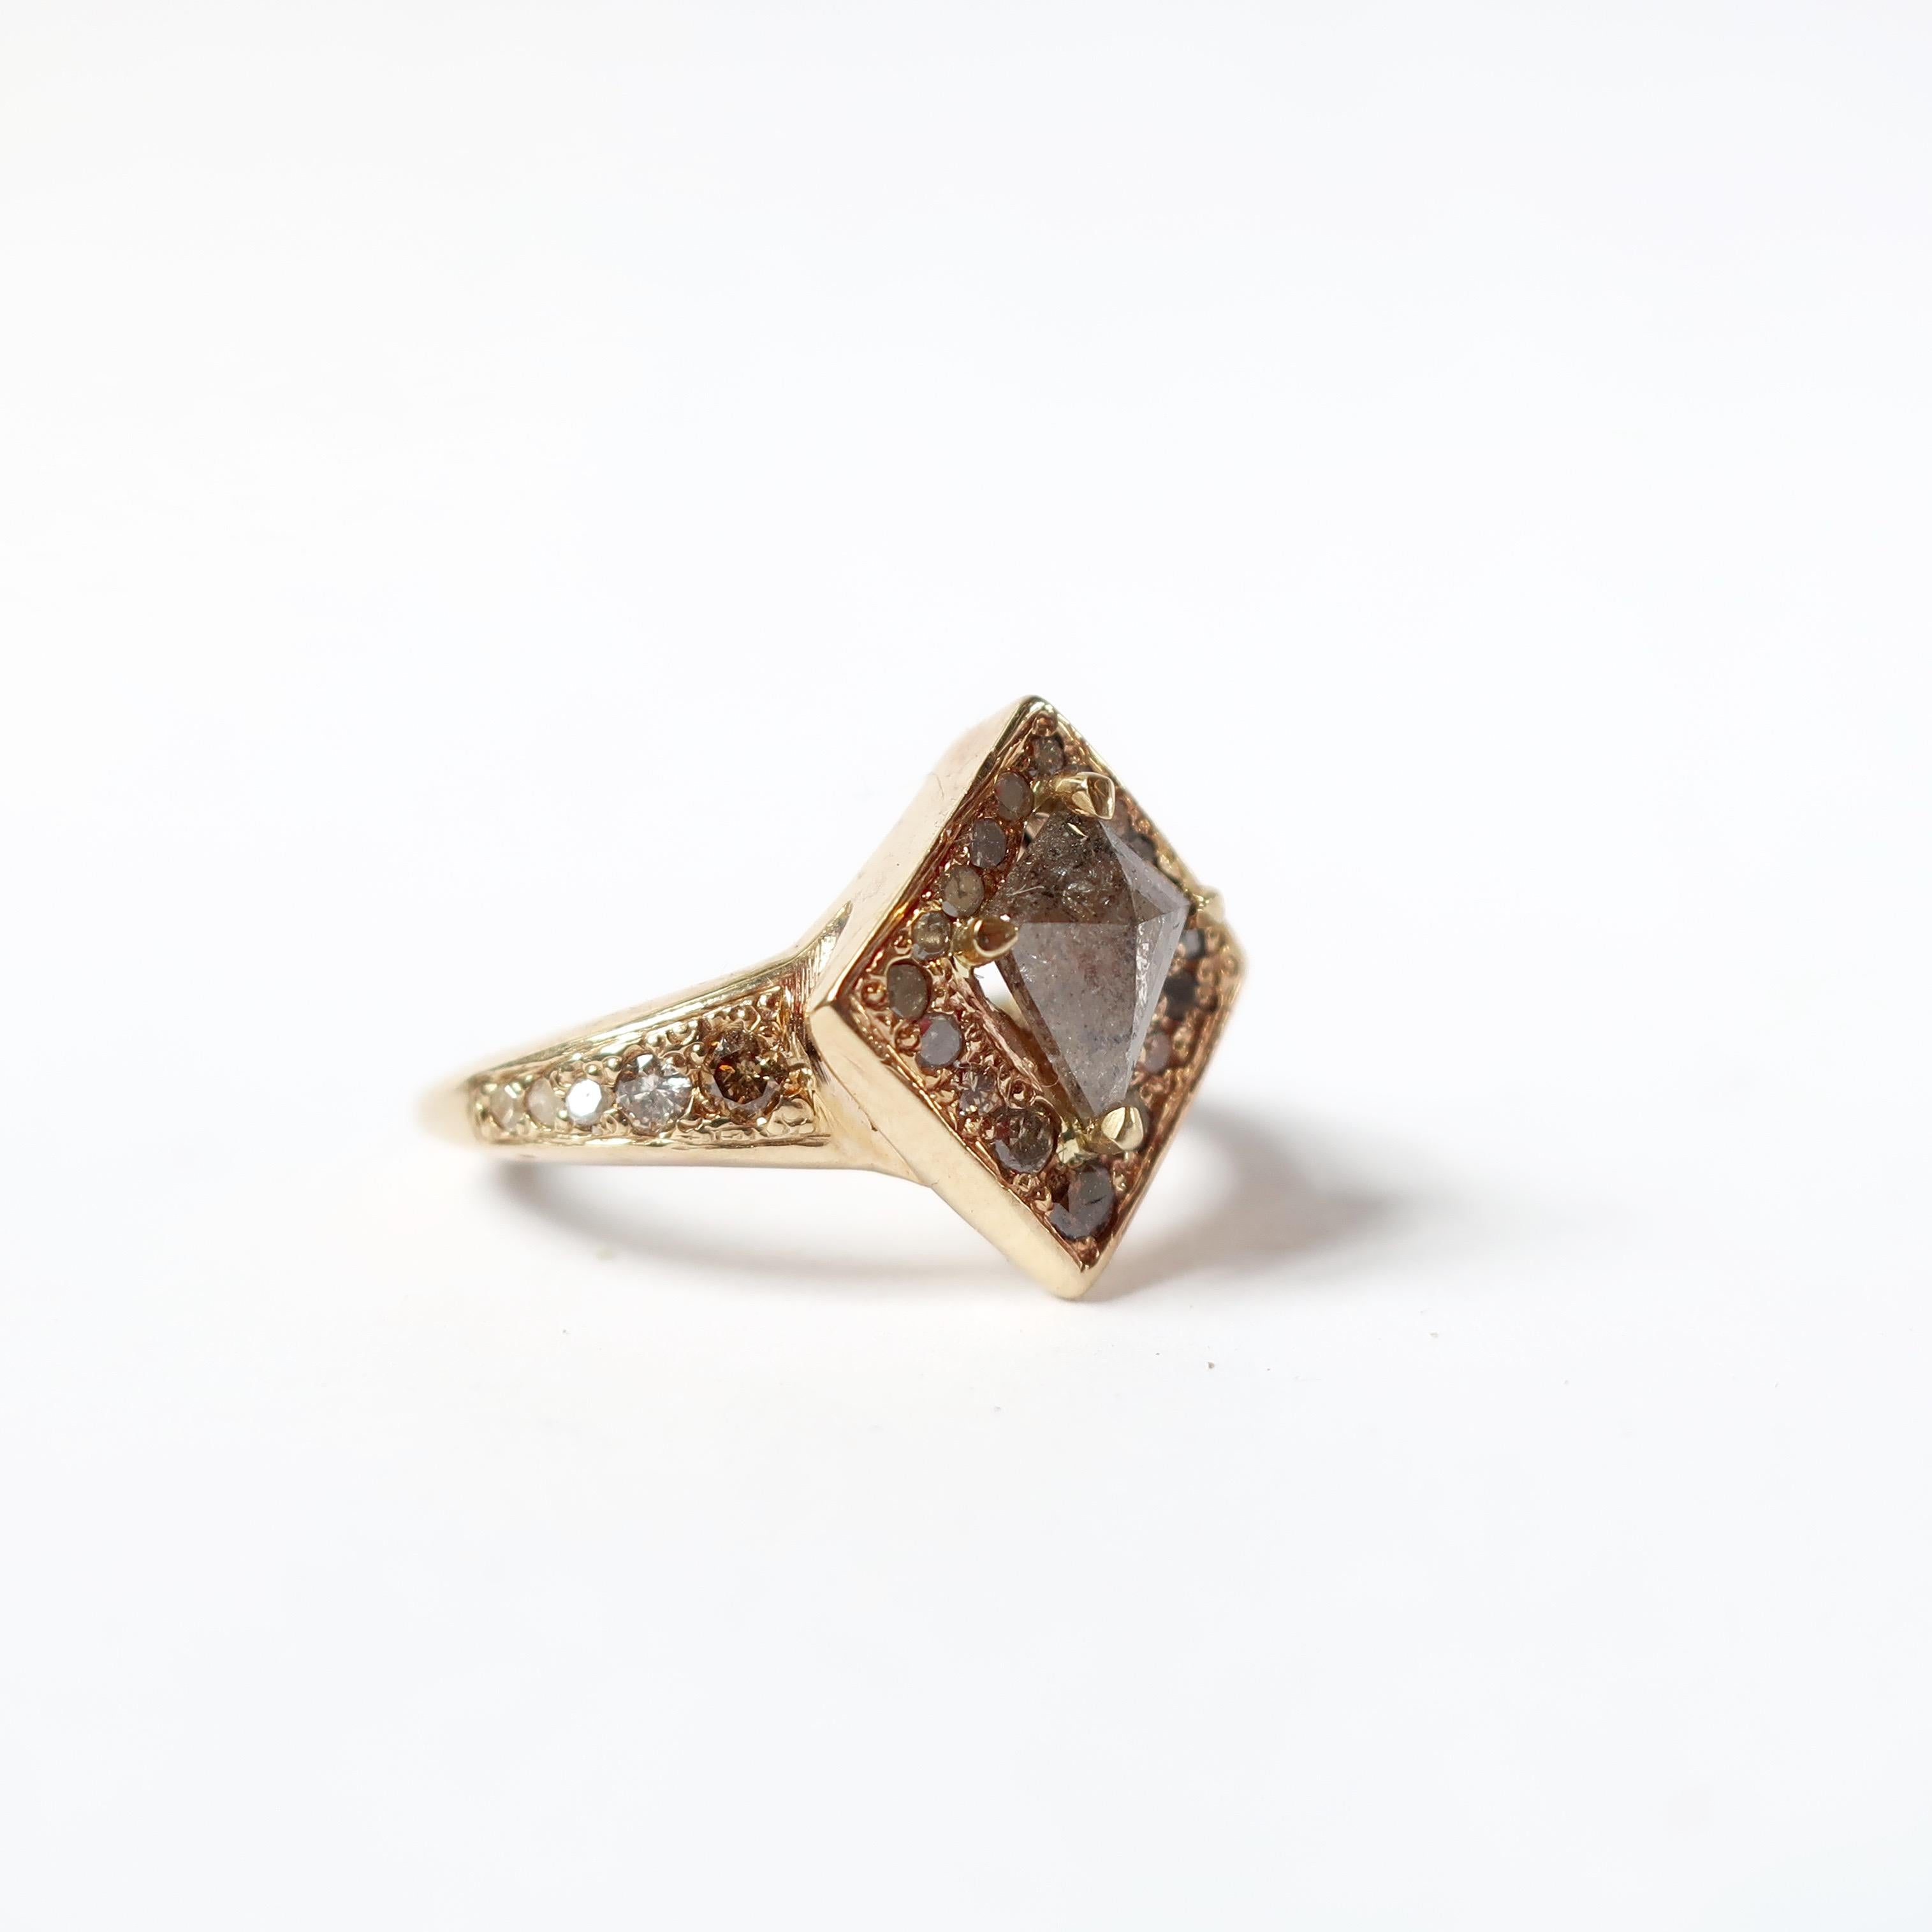 Gorgeous 14k yellow gold engagement ring highlighting a grey kite diamond center surrounded by beautifully selected brown, champagne and white diamonds . Center stone measures 7.6x 6.2mm.

One of a kind Size 4.5

